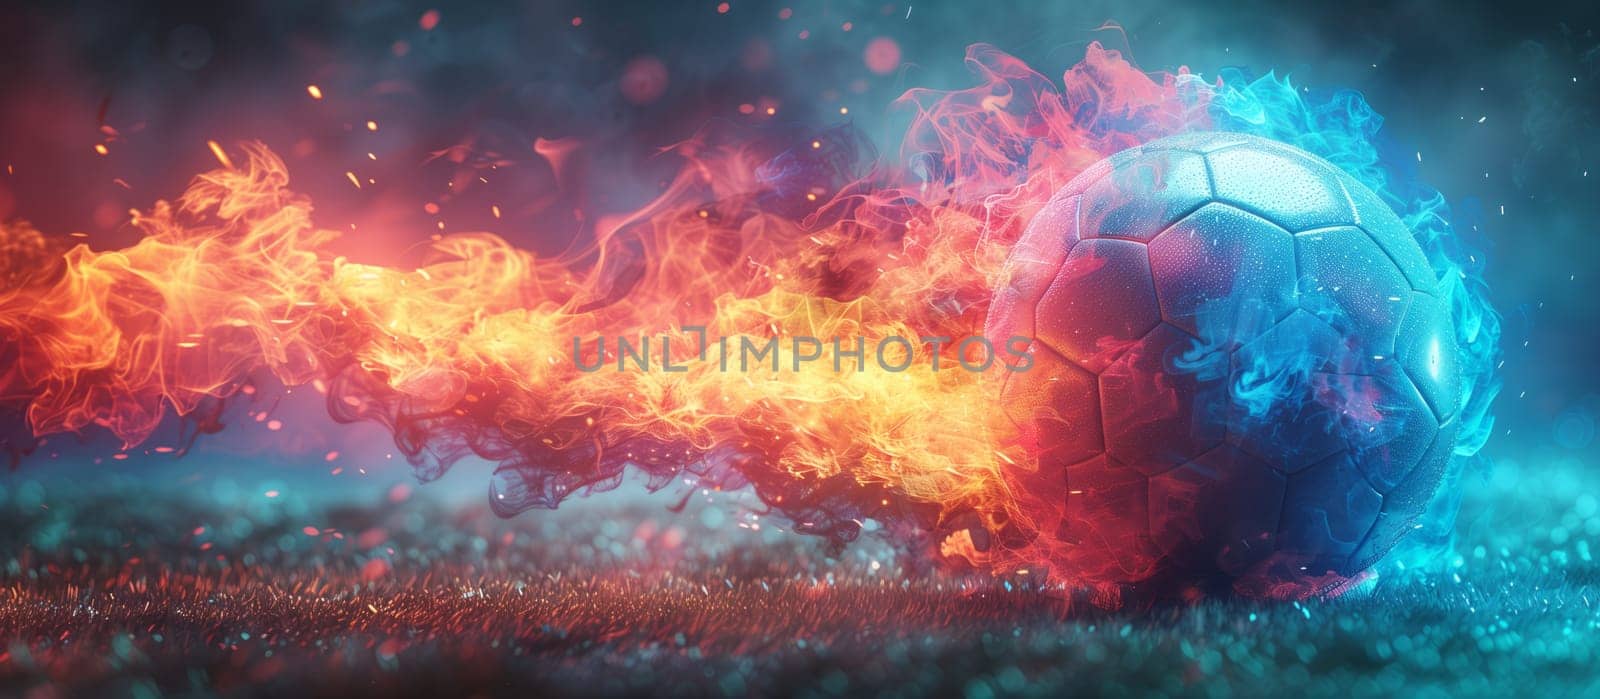 Soccer ball engulfed in flames on field, creating a fiery atmosphere by richwolf